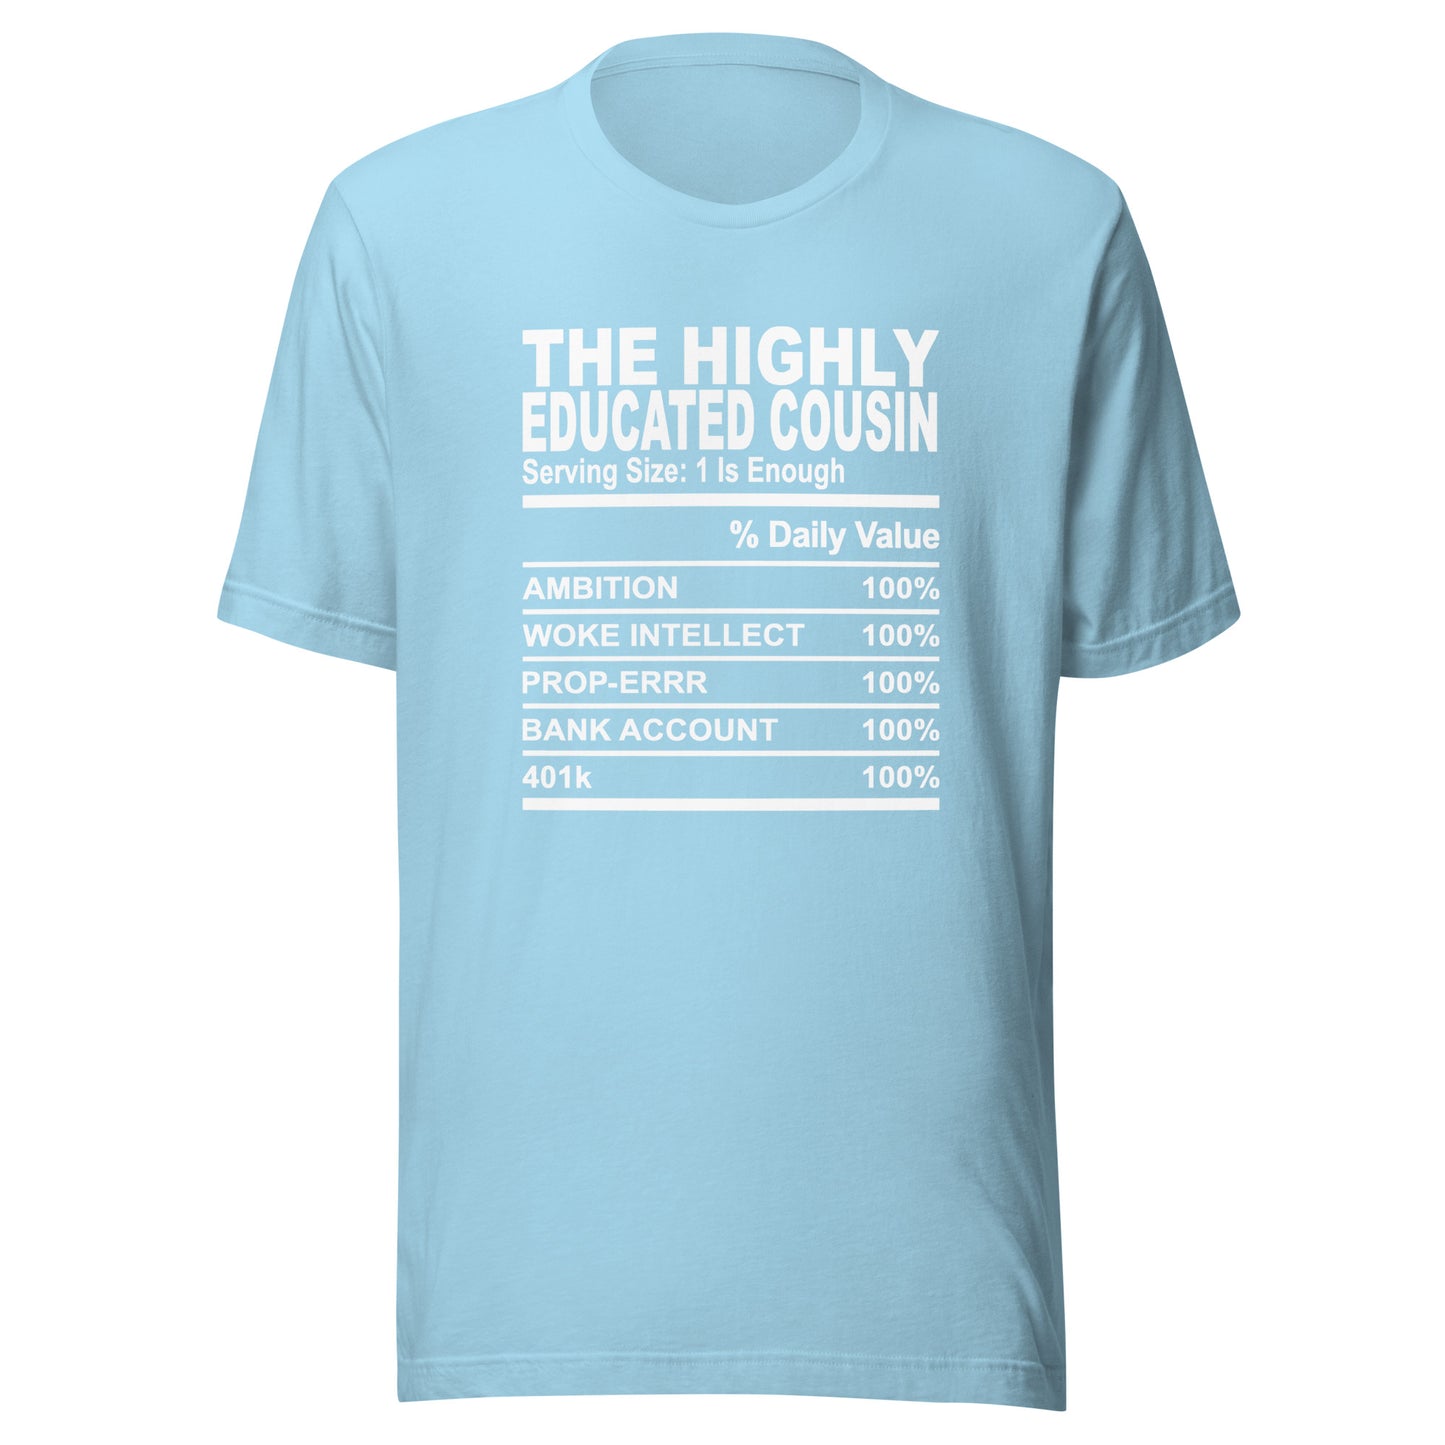 THE HIGHLY EDUCATED COUSIN - L-XL - Unisex T-Shirt (white print)